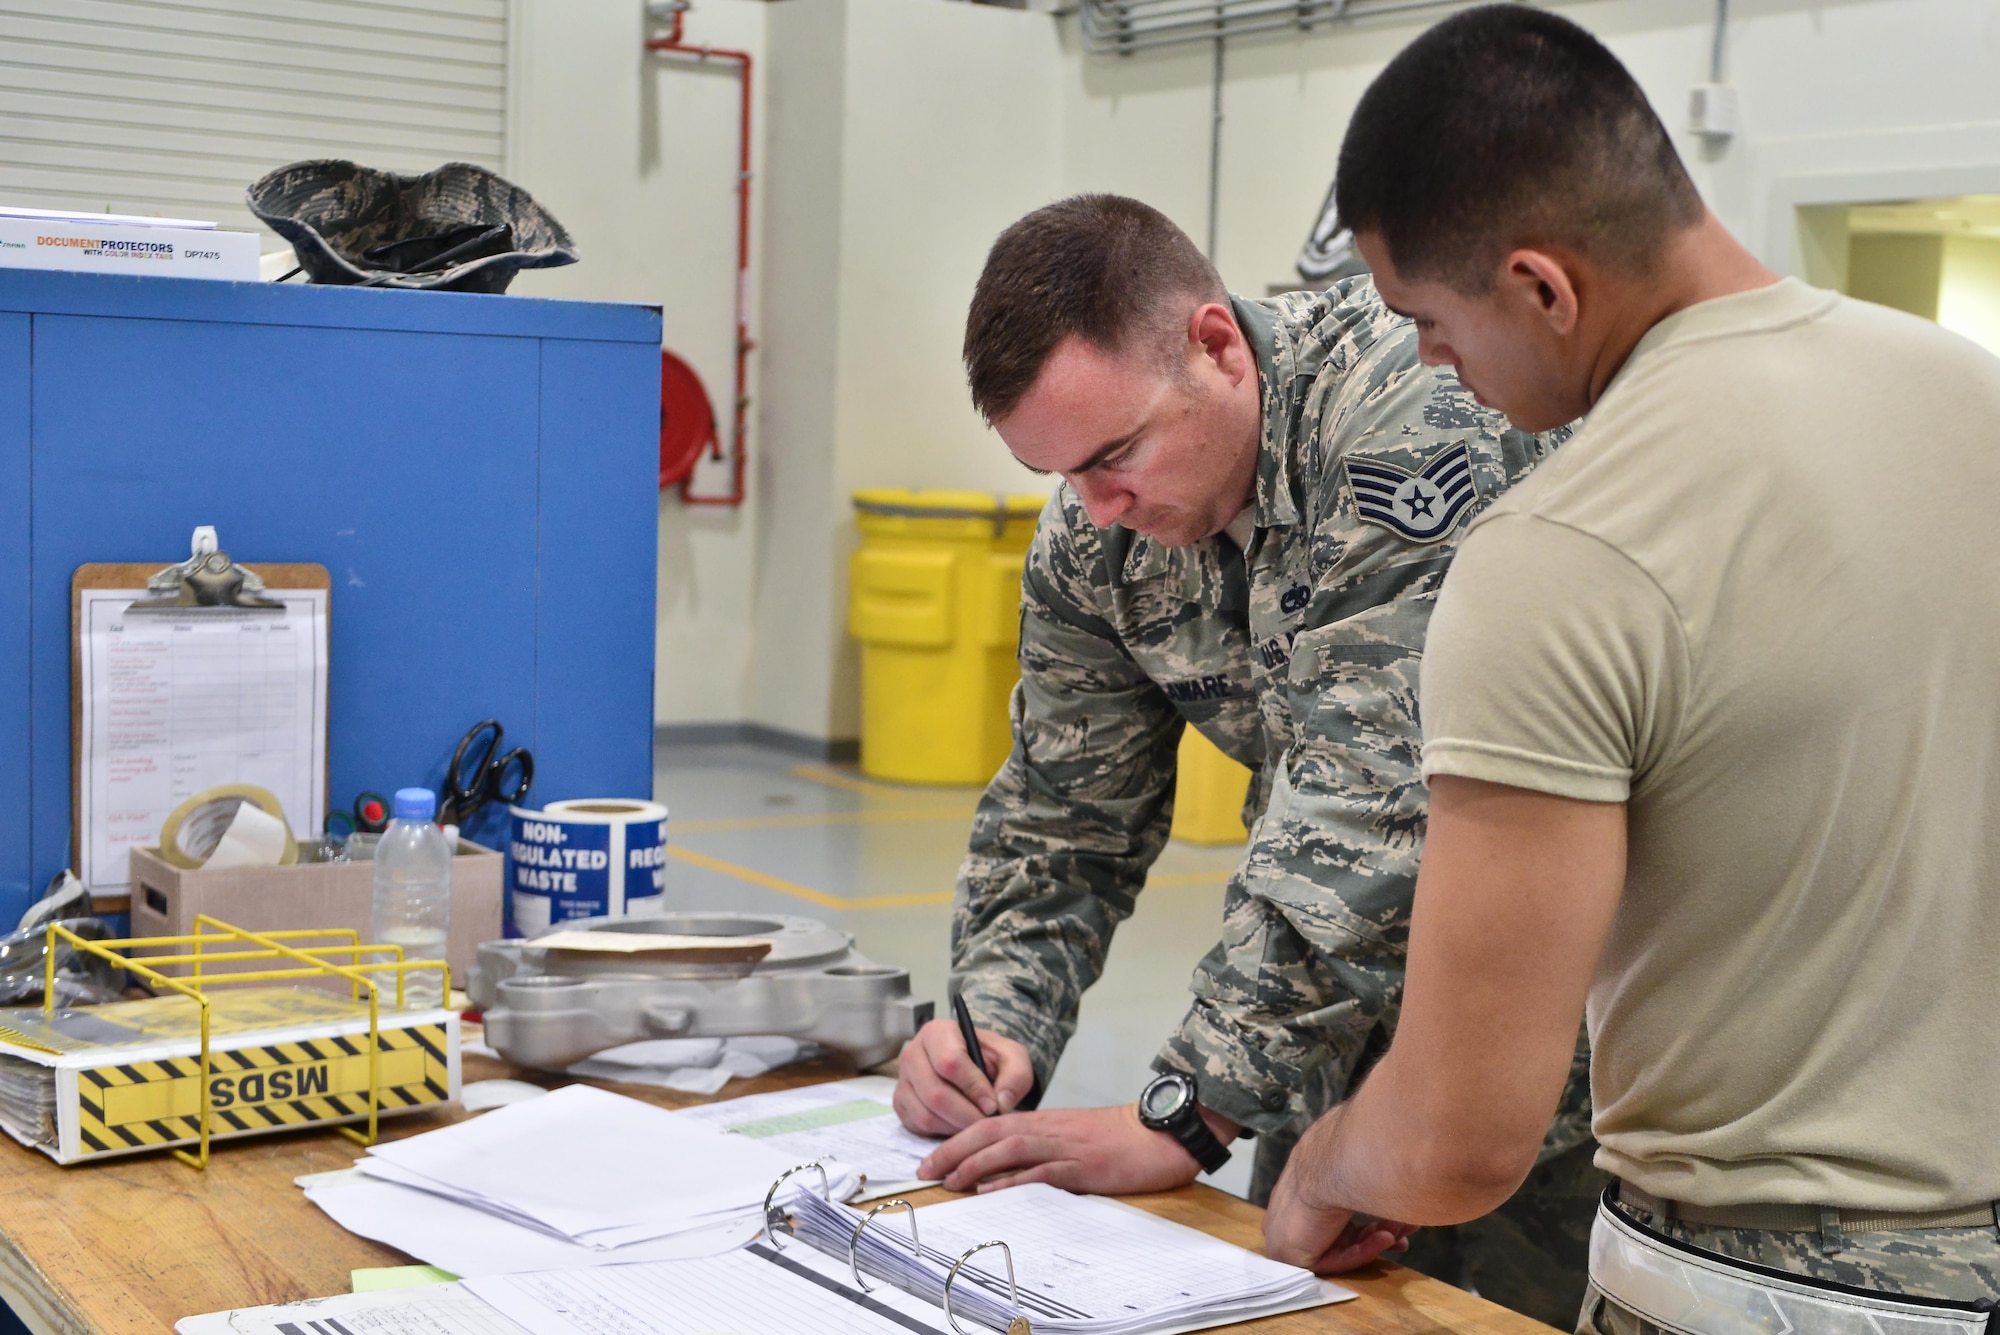 Airman 1st Class Berkeley Lopez, 379th Expeditionary Maintenance Squadron Nondestructive Inspection laboratory, helps a maintenance crew member sign in a brake part that will be tested for its stability August 12, 2015 at Al Udeid Air Base, Qatar. NDI Airmen inspect for cracks and flaws on aircraft and their components, aerospace ground equipment and safety equipment.  They also test jet engine oil samples, using a variety of methods, like magnetic particle, fluorescent penetrant, eddy current, radiography, optical and ultrasonic equipment. (U.S. Air Force photo/Staff Sgt. Alexandre Montes)   